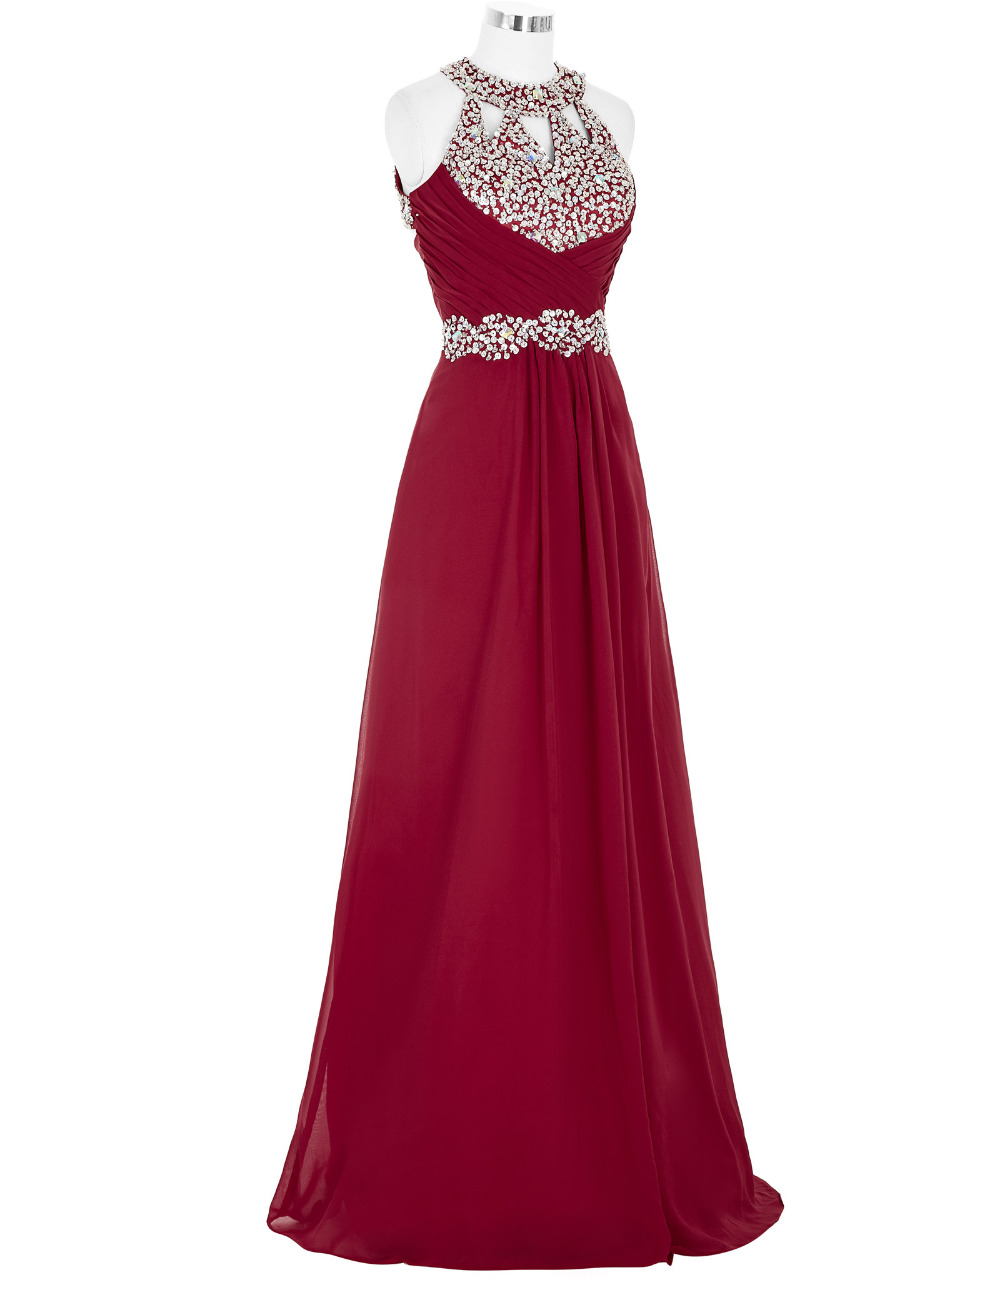 Burgundy Beaded Halter Prom Dresses , Strapless Chiffon A Line Evening Gowns - Formal Gowns, Party Dresses